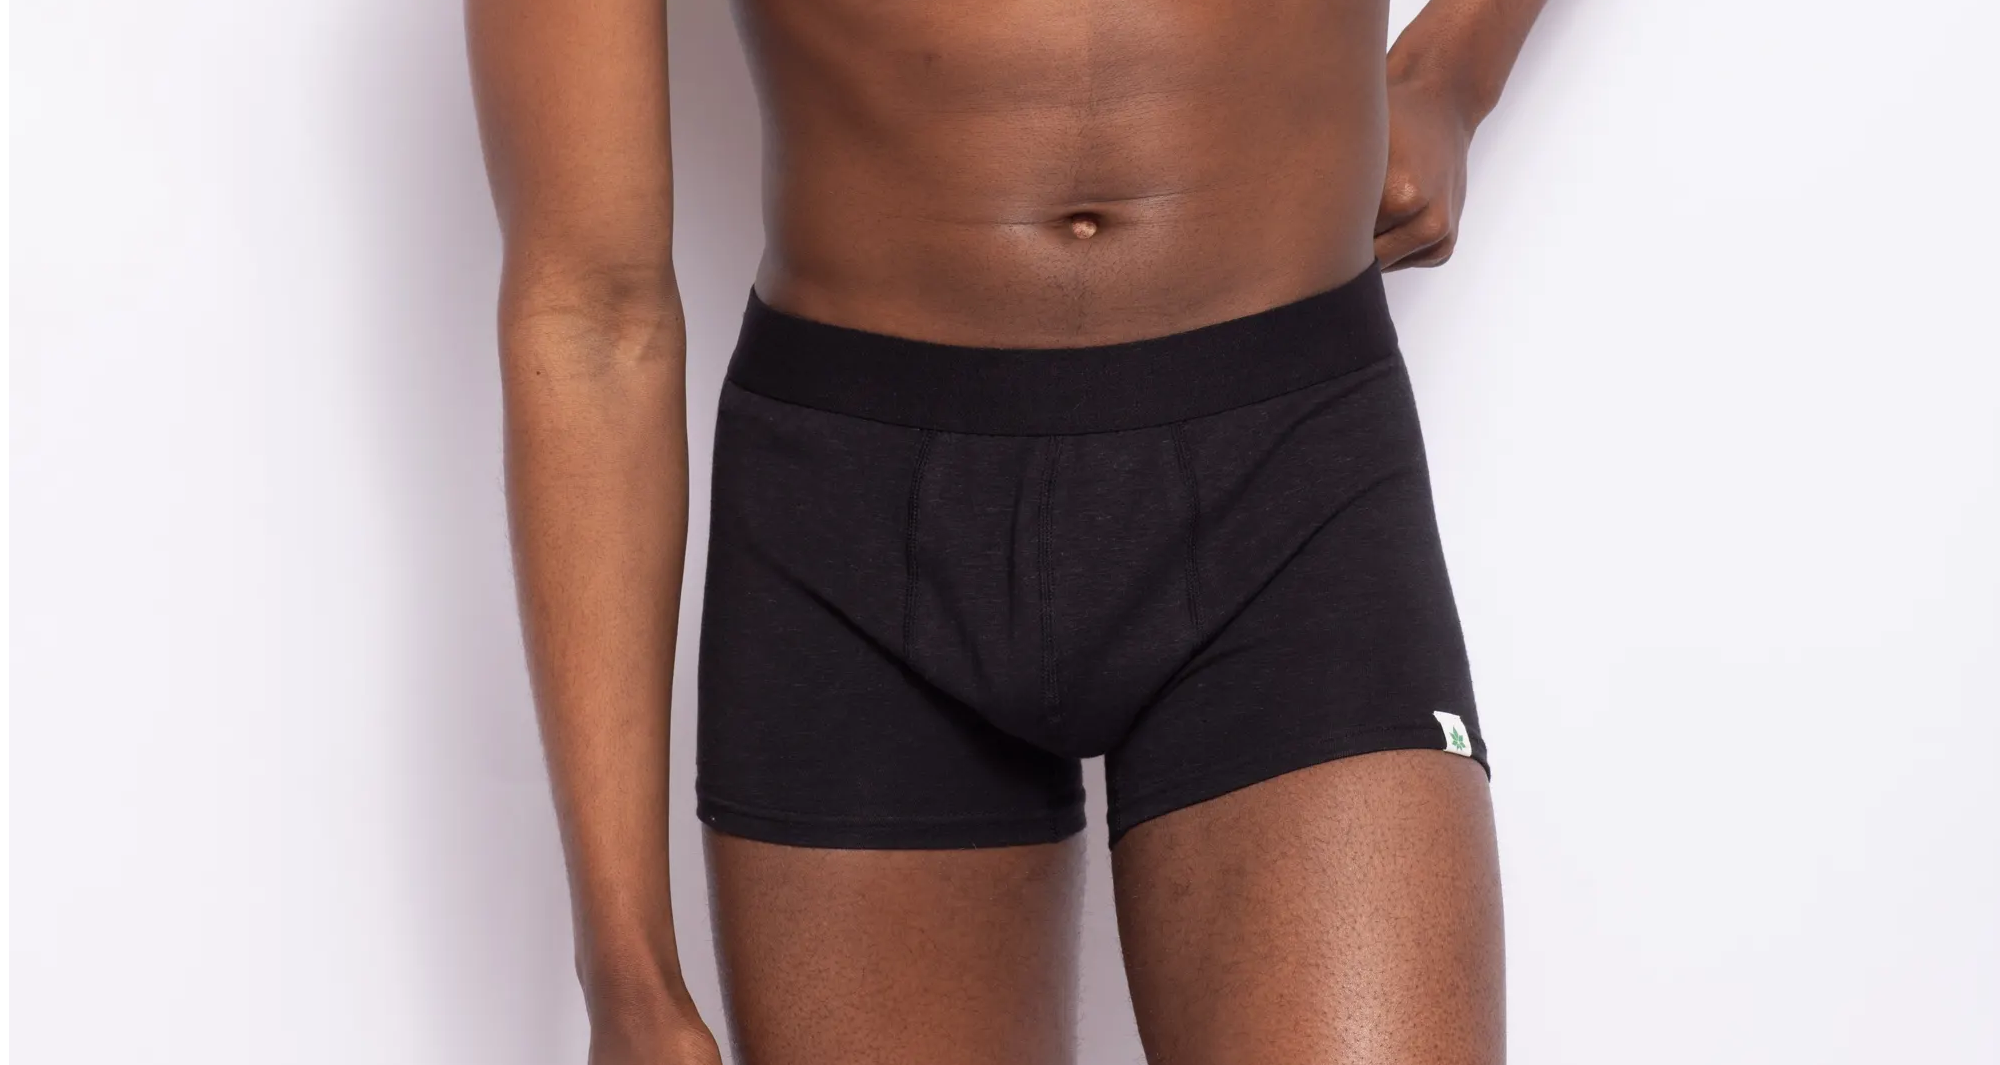 Boxer Briefs vs Trunks: What's The Difference? – WAMA Underwear